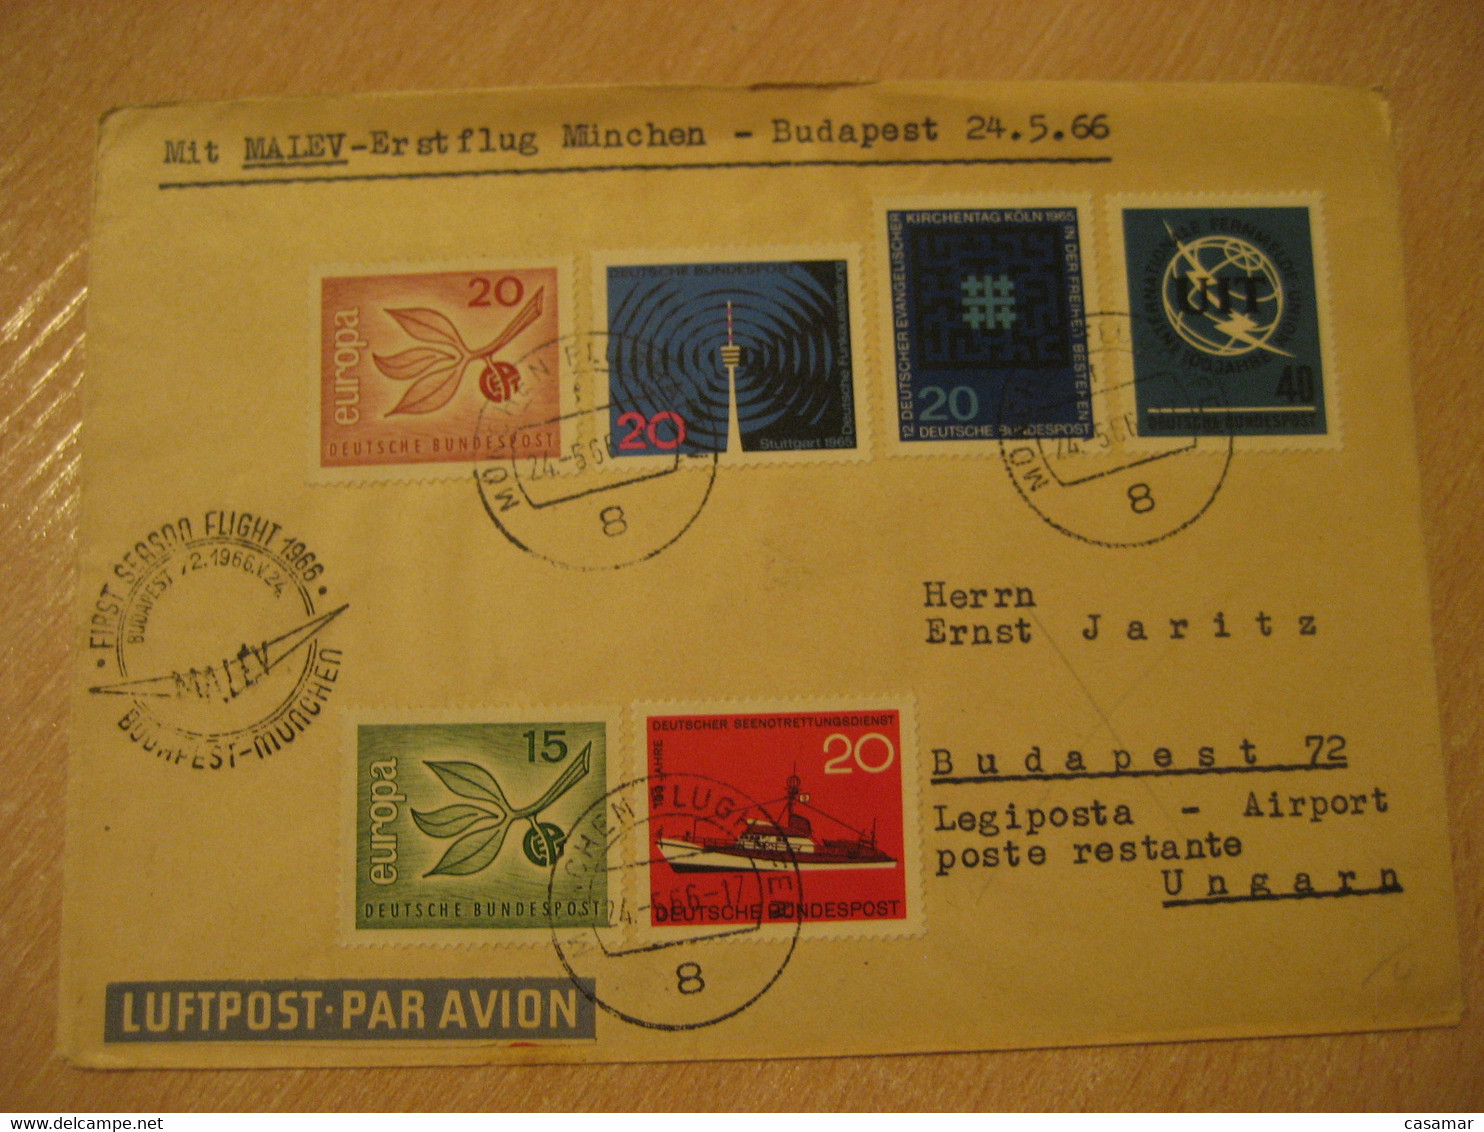 BUDAPEST Munich 1966 MALEV Airlines Airline First Season Flight Cancel Cover HUNGARY GERMANY - Lettres & Documents